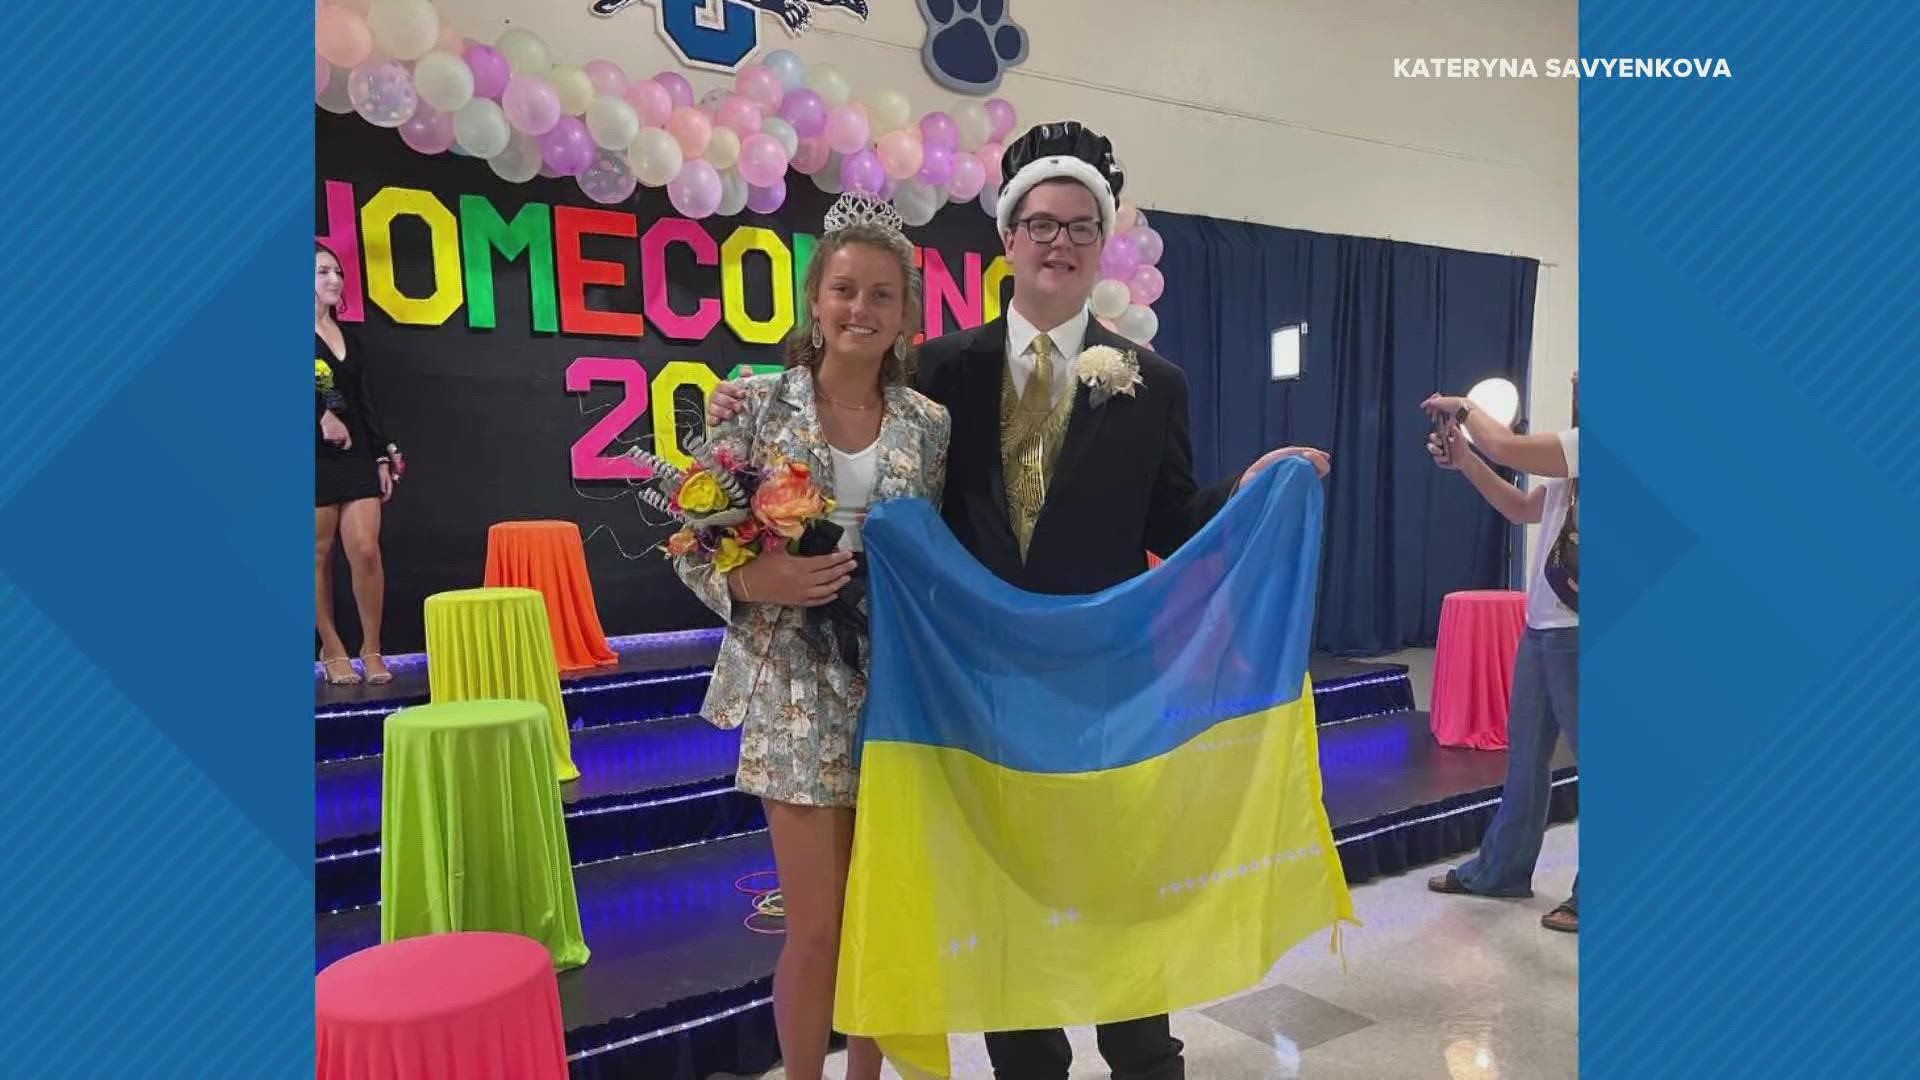 Homecoming Queen and Jersey Community High School senior Kateryna Savyenkova is a second-year exchange student from Ukraine.